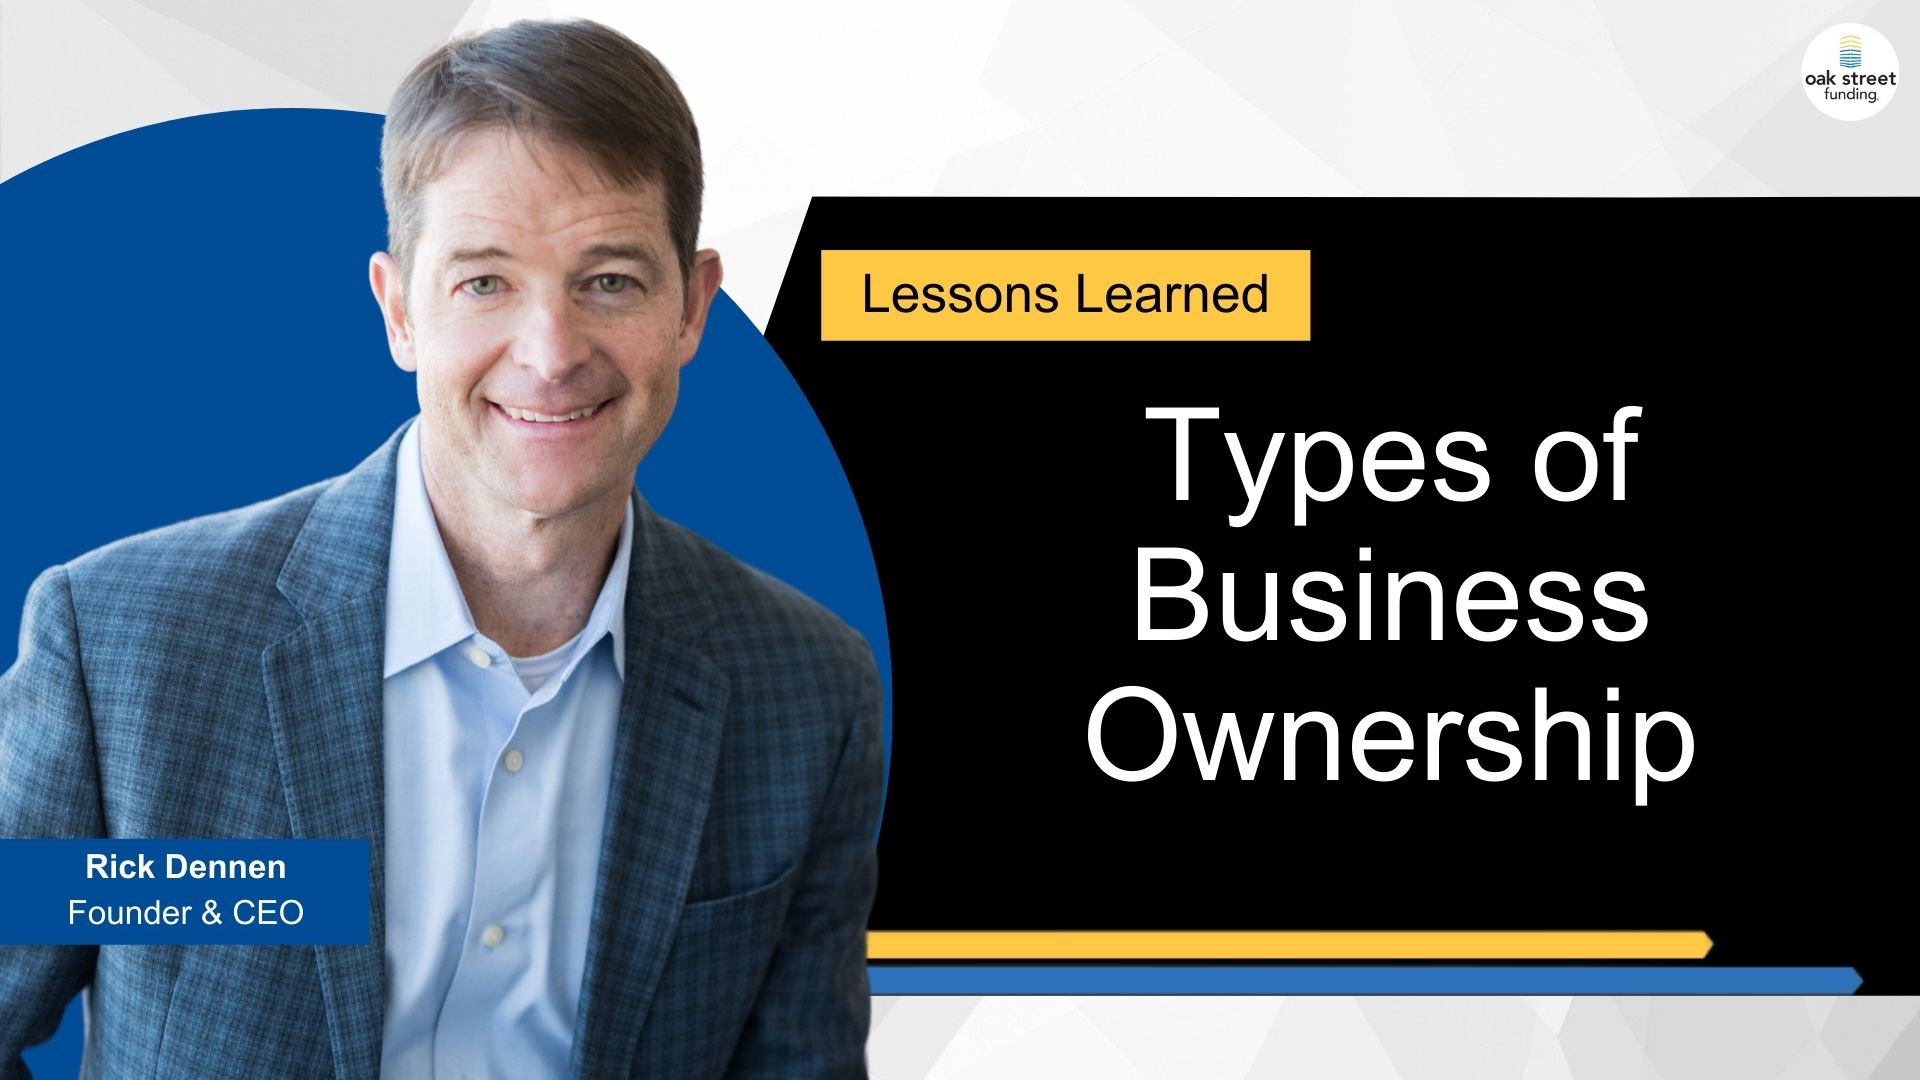 Lessons Learned: Types of Business Ownership